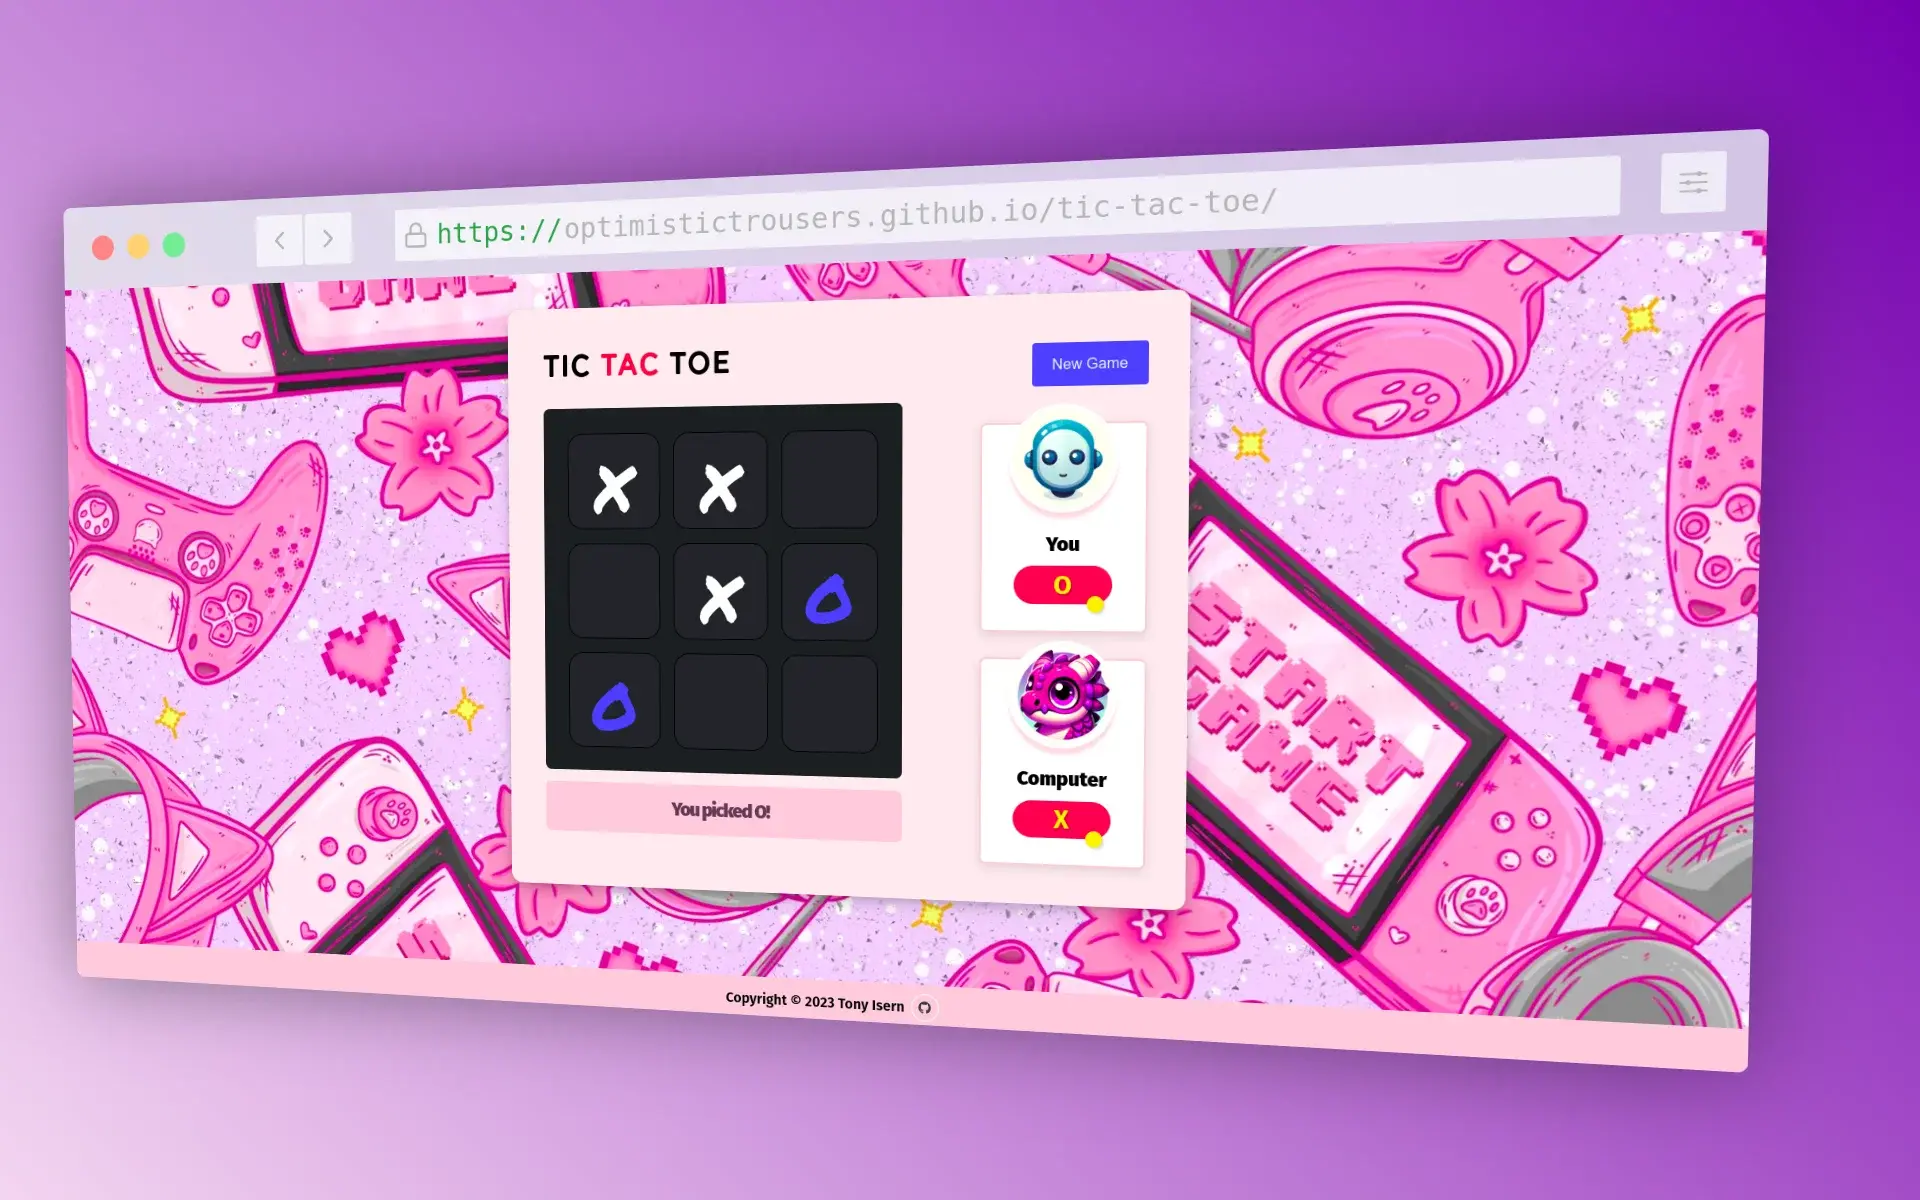 A vibrant web browser interface showcasing a Tic Tac Toe game on a pink background with playful illustrations of game controllers, consoles, and related elements. The game board displays a few moves with 'X' and water drop shapes. On the side, there are avatars for 'You' and the 'Computer', with 'You' having chosen the water drop shape. The URL reads 'https://optimistictrousers.github.io/tic-tac-toe/' and the copyright at the bottom mentions '2023 Tony Isern'.